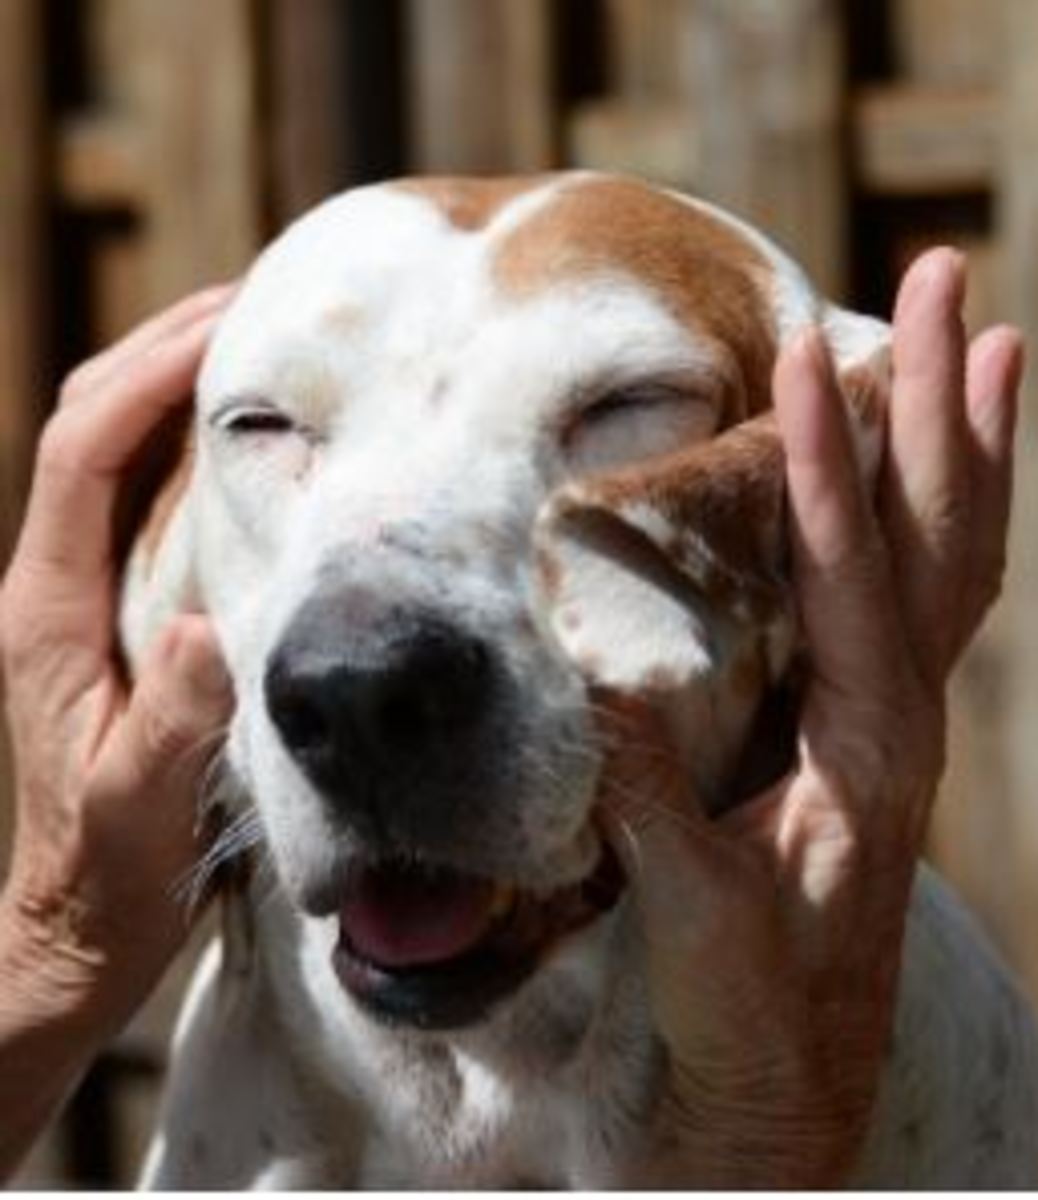 Dogs should perceive hands as sources of good things.